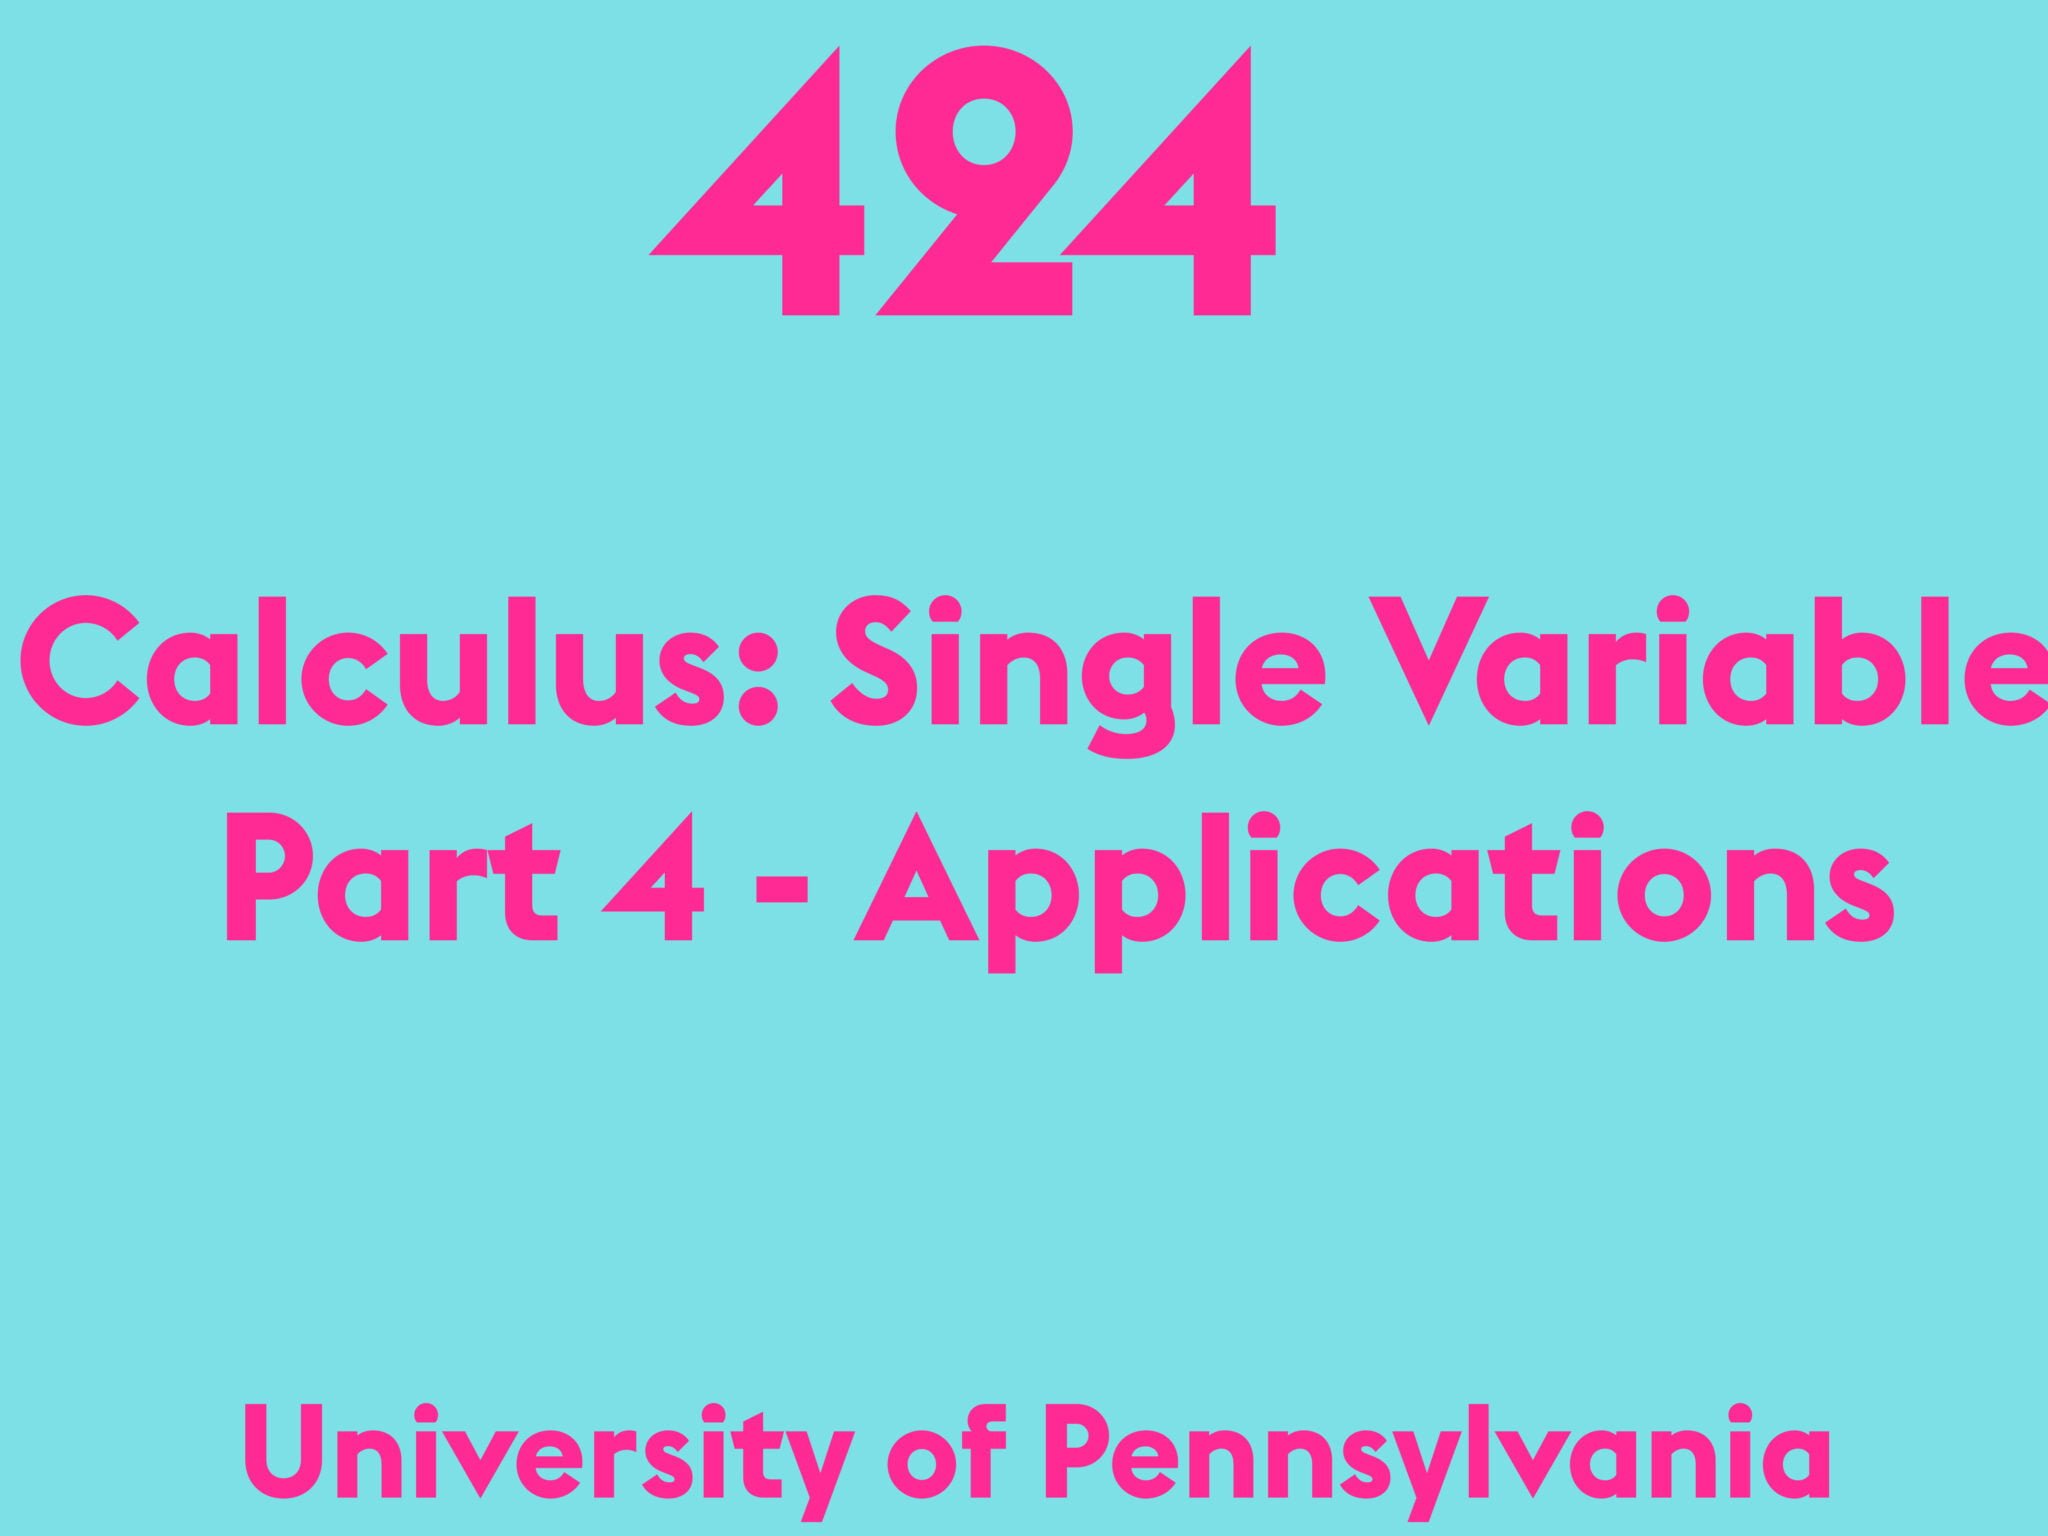 Calculus: Single Variable Part 4 - Applications